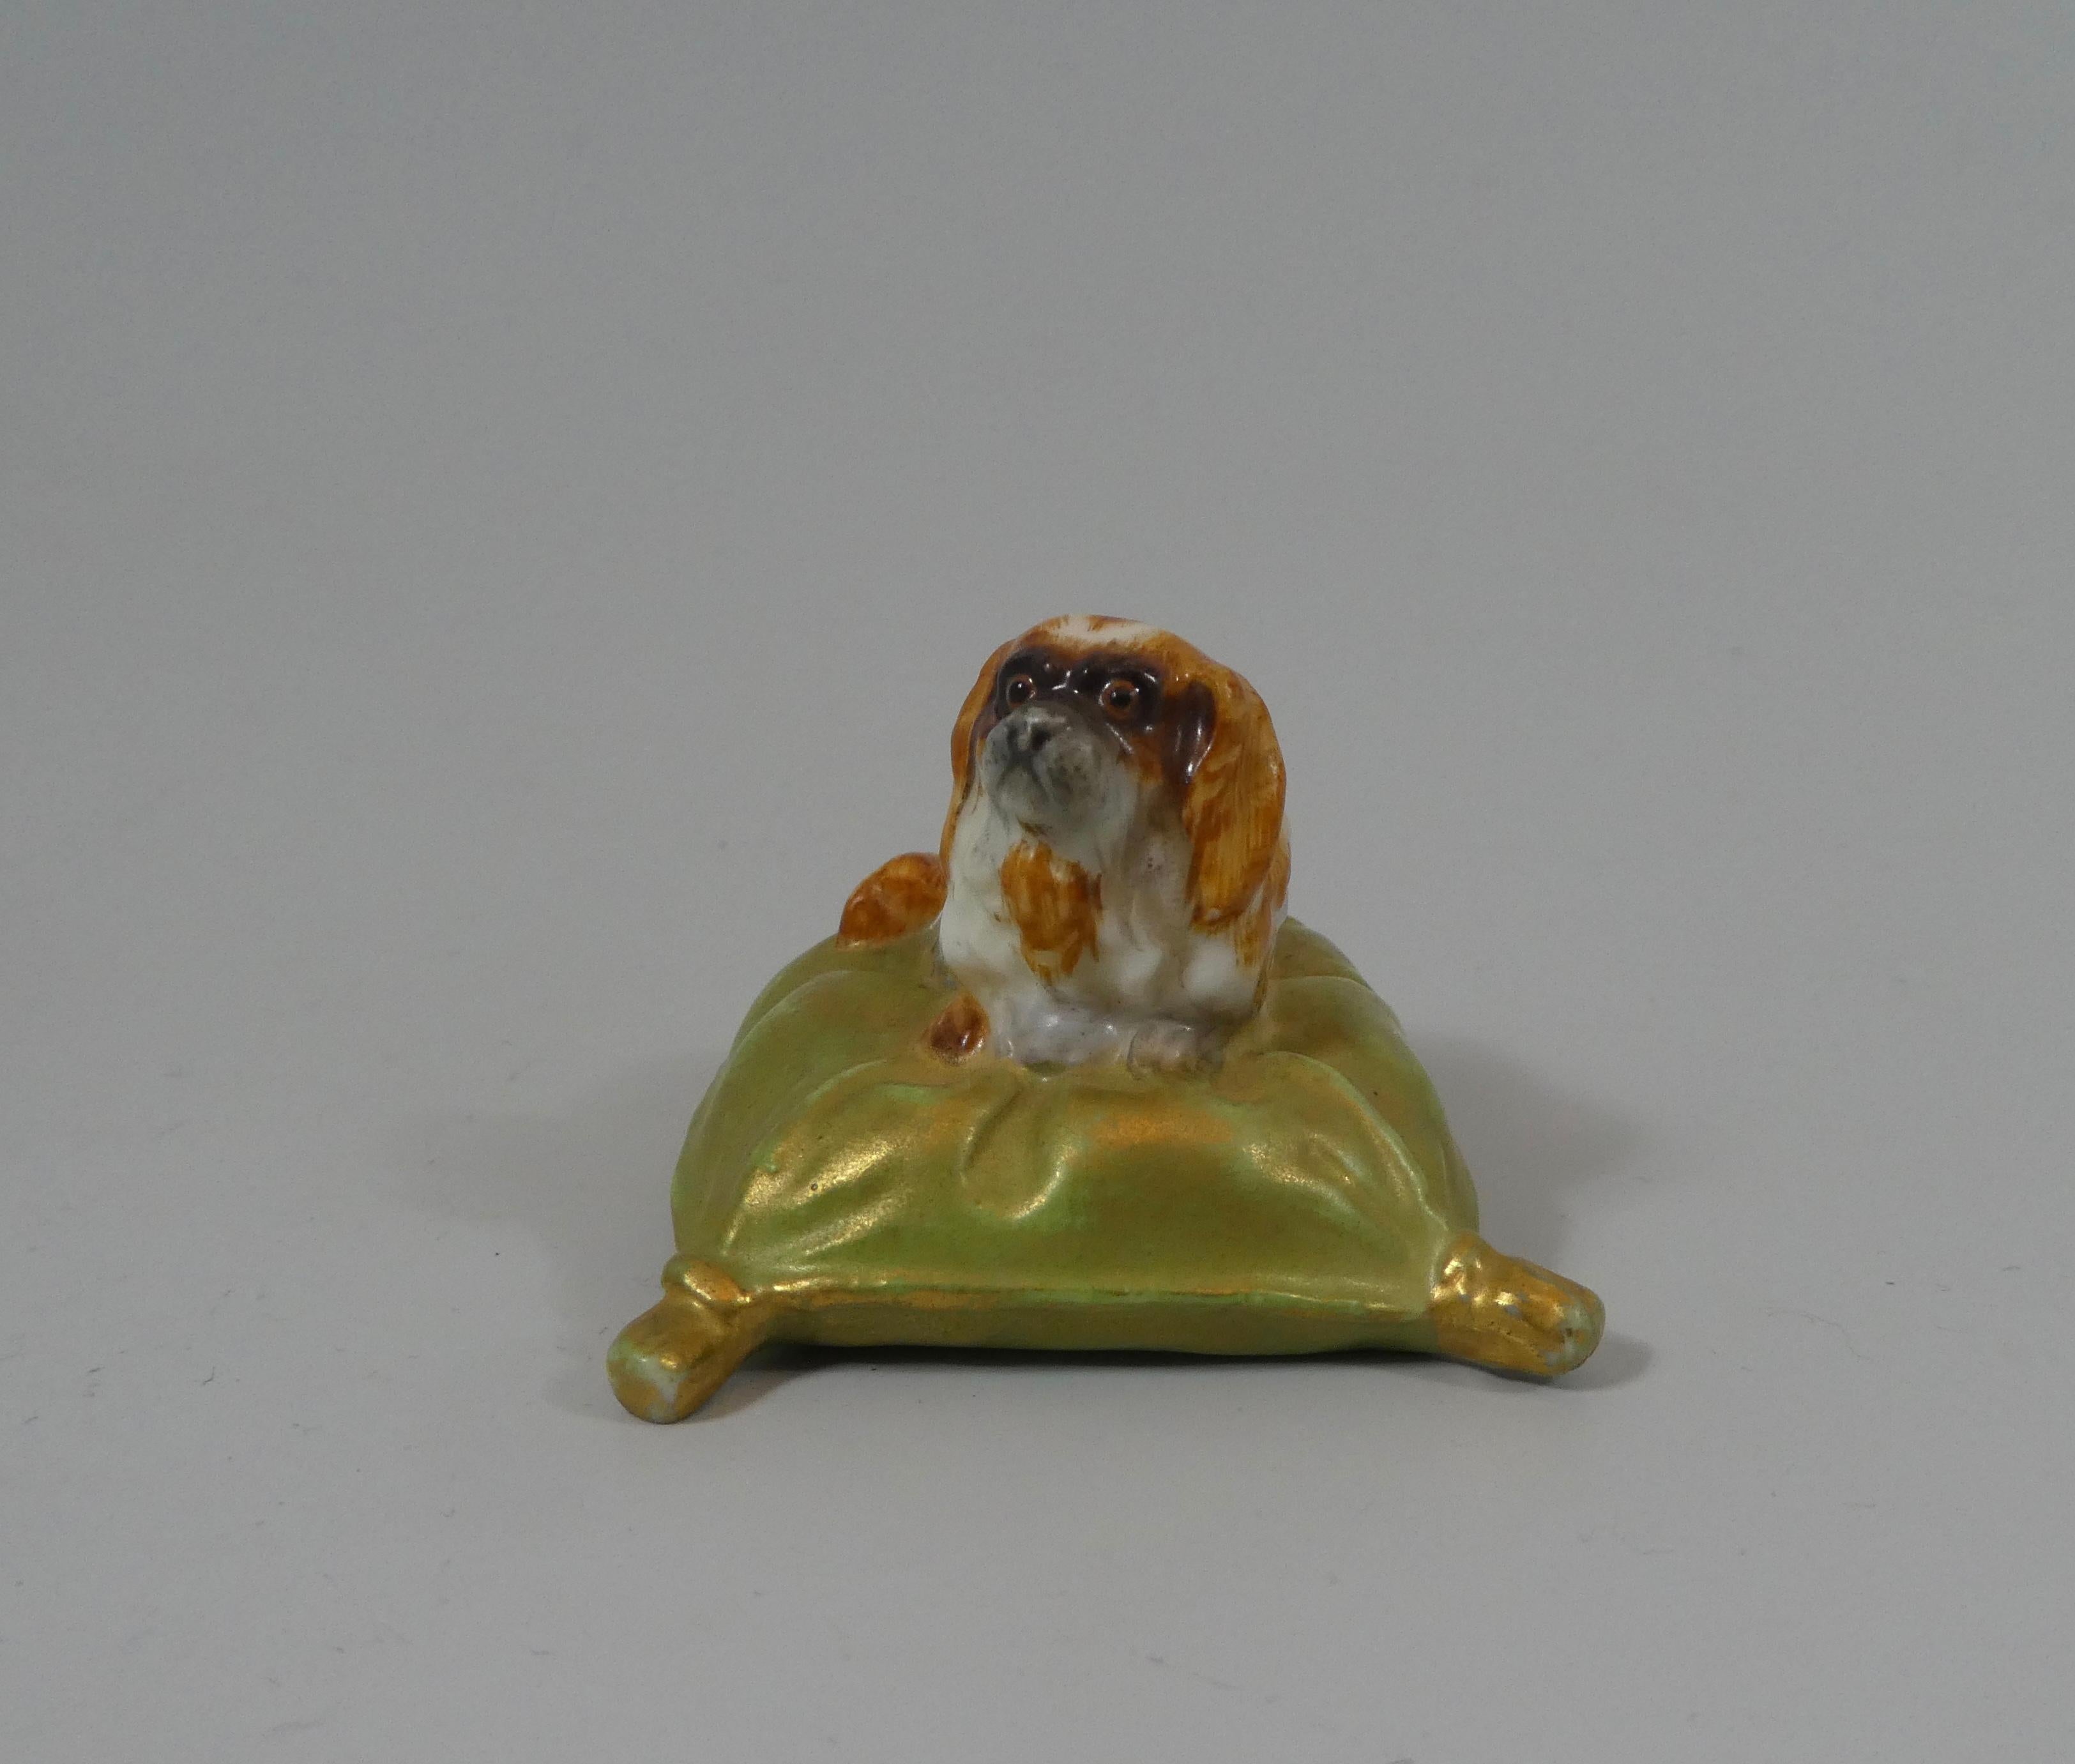 Royal Worcester porcelain figure, dated 1901. Finely and charmingly modelled as a King Charles spaniel, lying upon a large, gilt tasseled cushion. The Spaniel painted with tan colored spots.
Green printed factory marks, and date code for